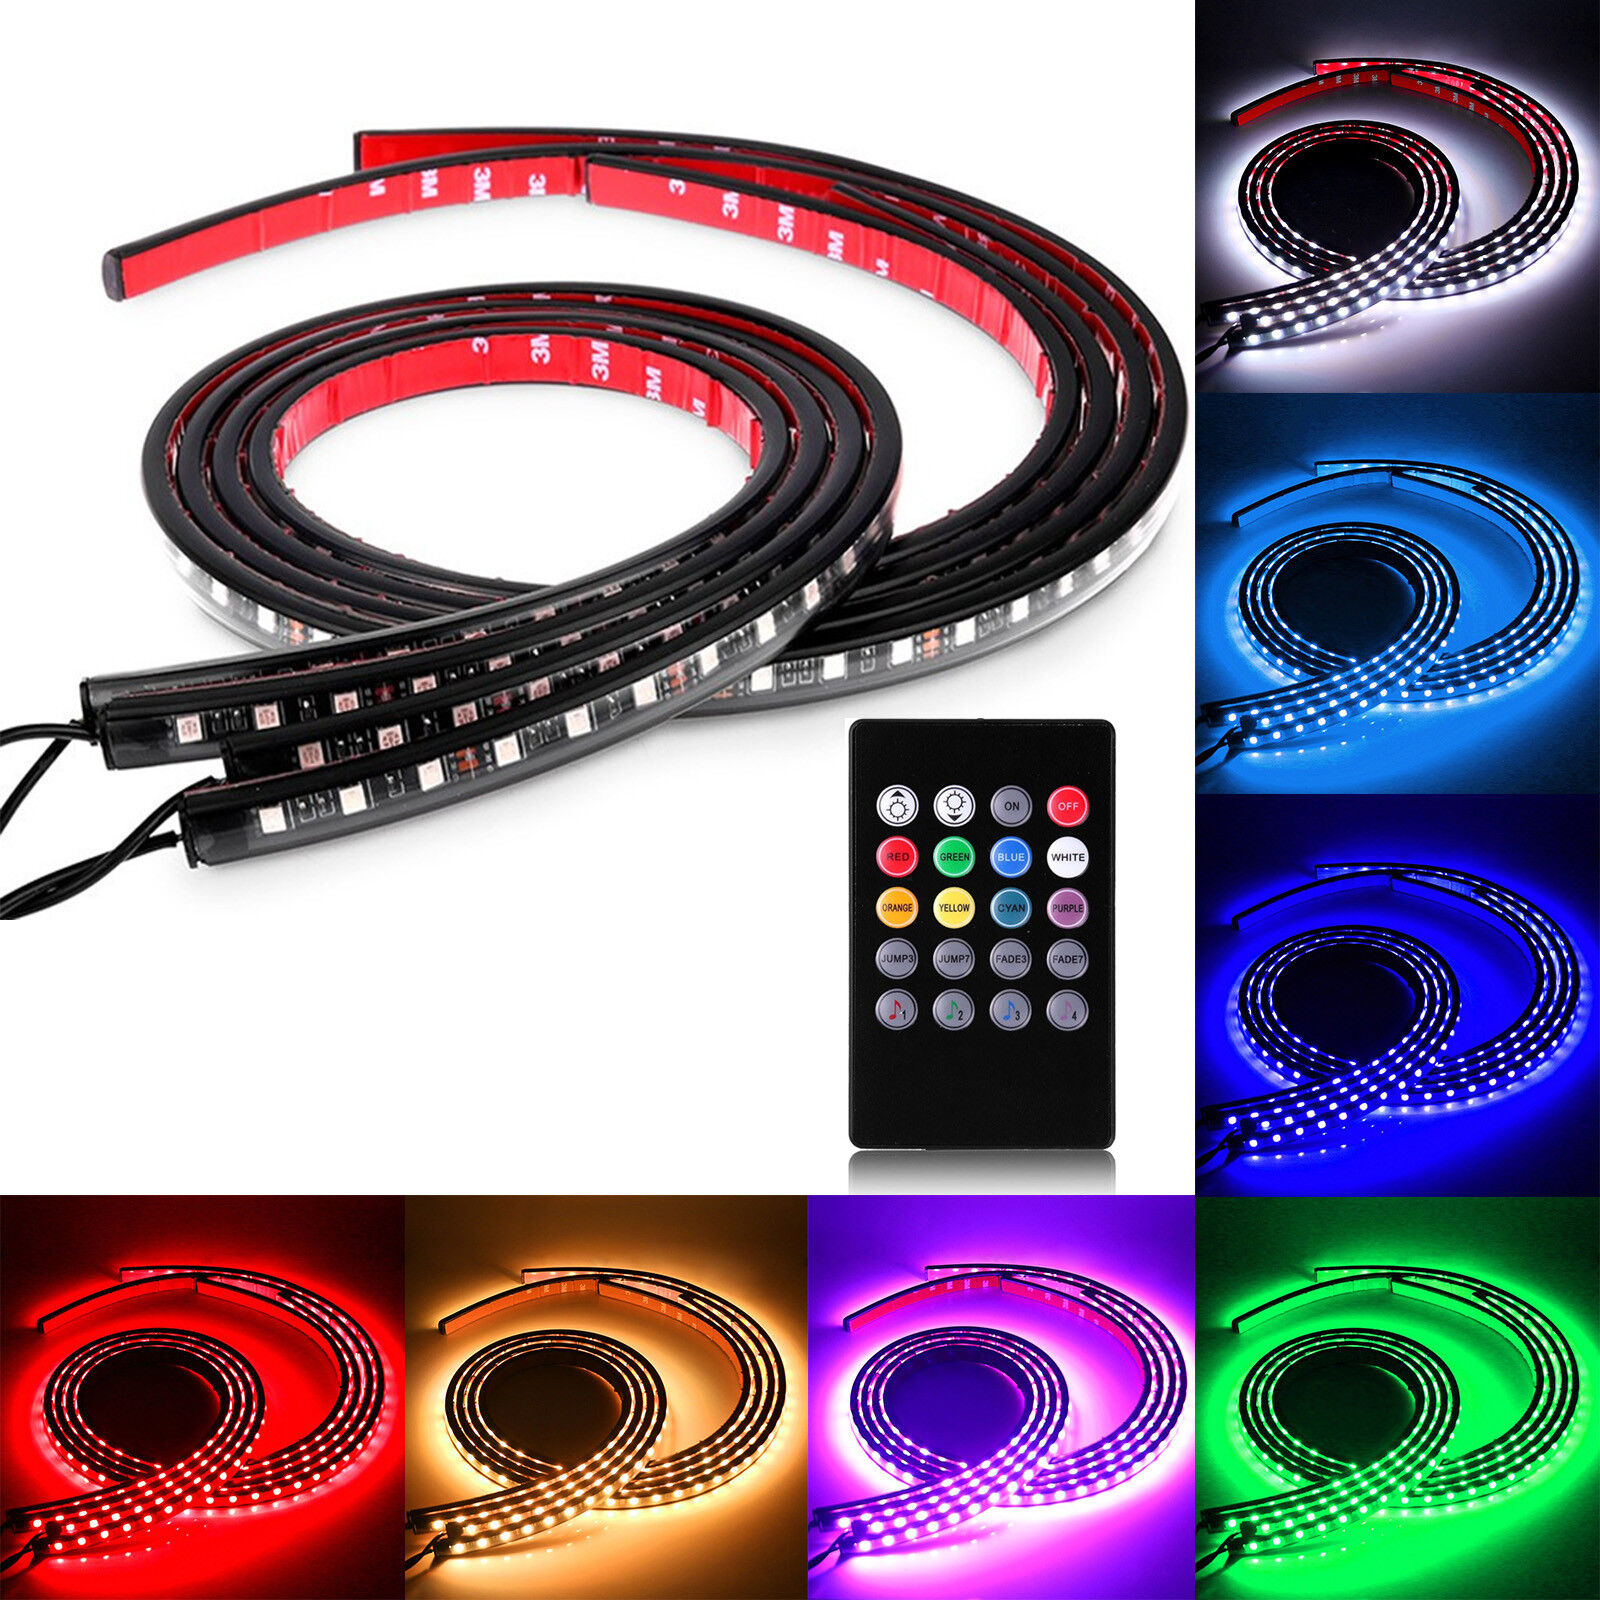 8 Color LED NEON LIGHT STRIPS UNDERBODY UNDERCAR KIT WIRELESS RC + Sound Active